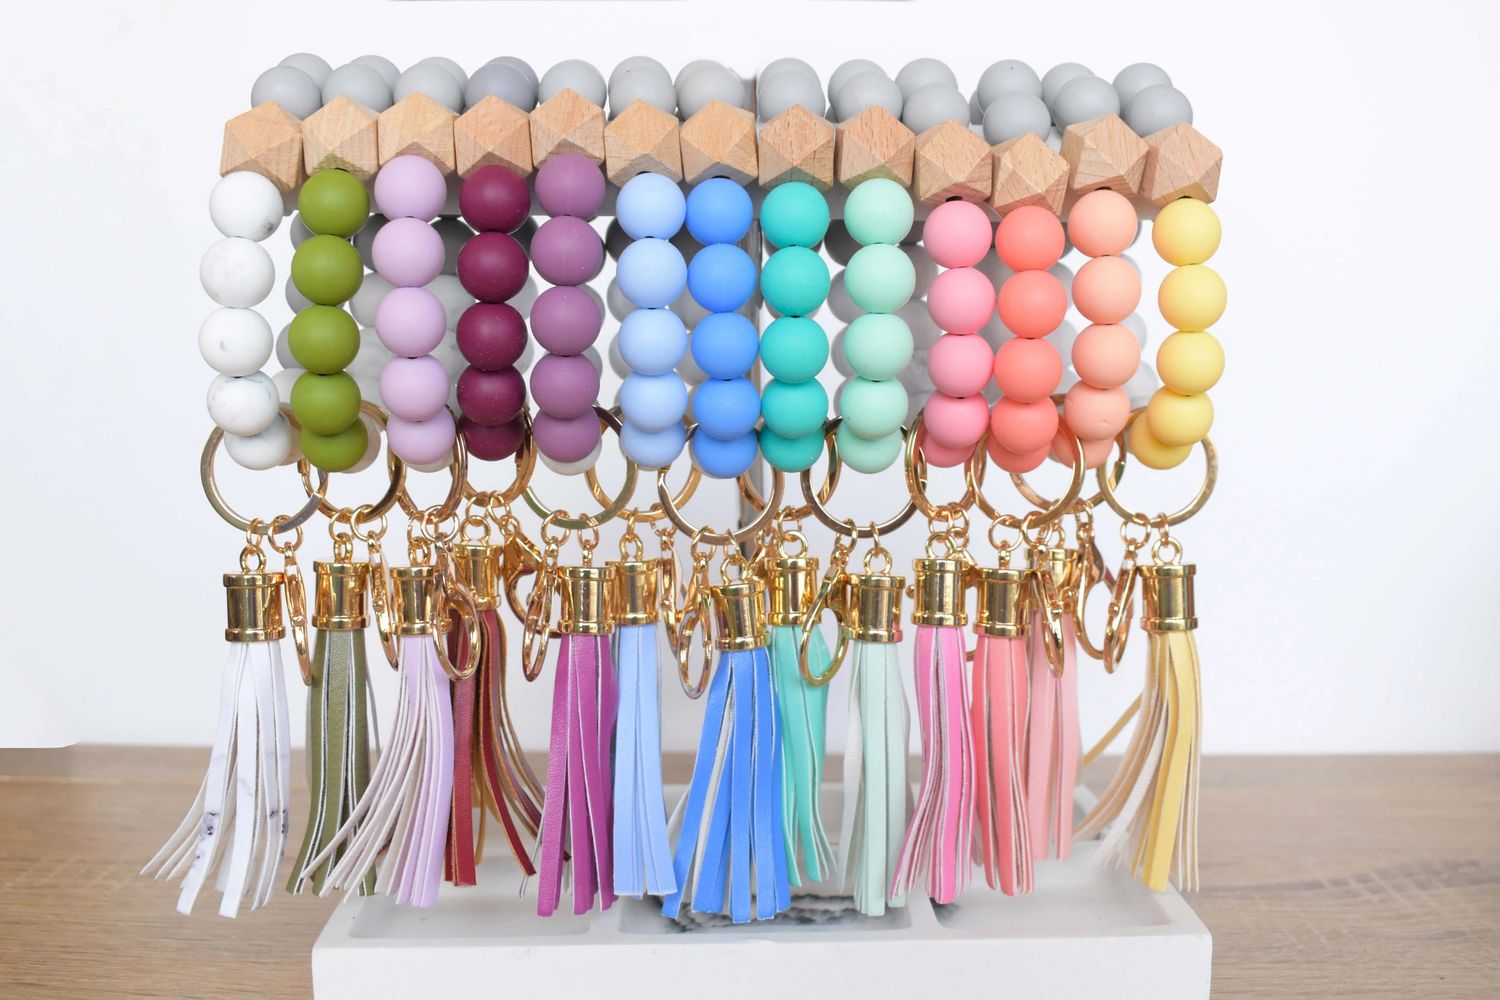 Purchase Wholesale silicone bead keychain. Free Returns & Net 60